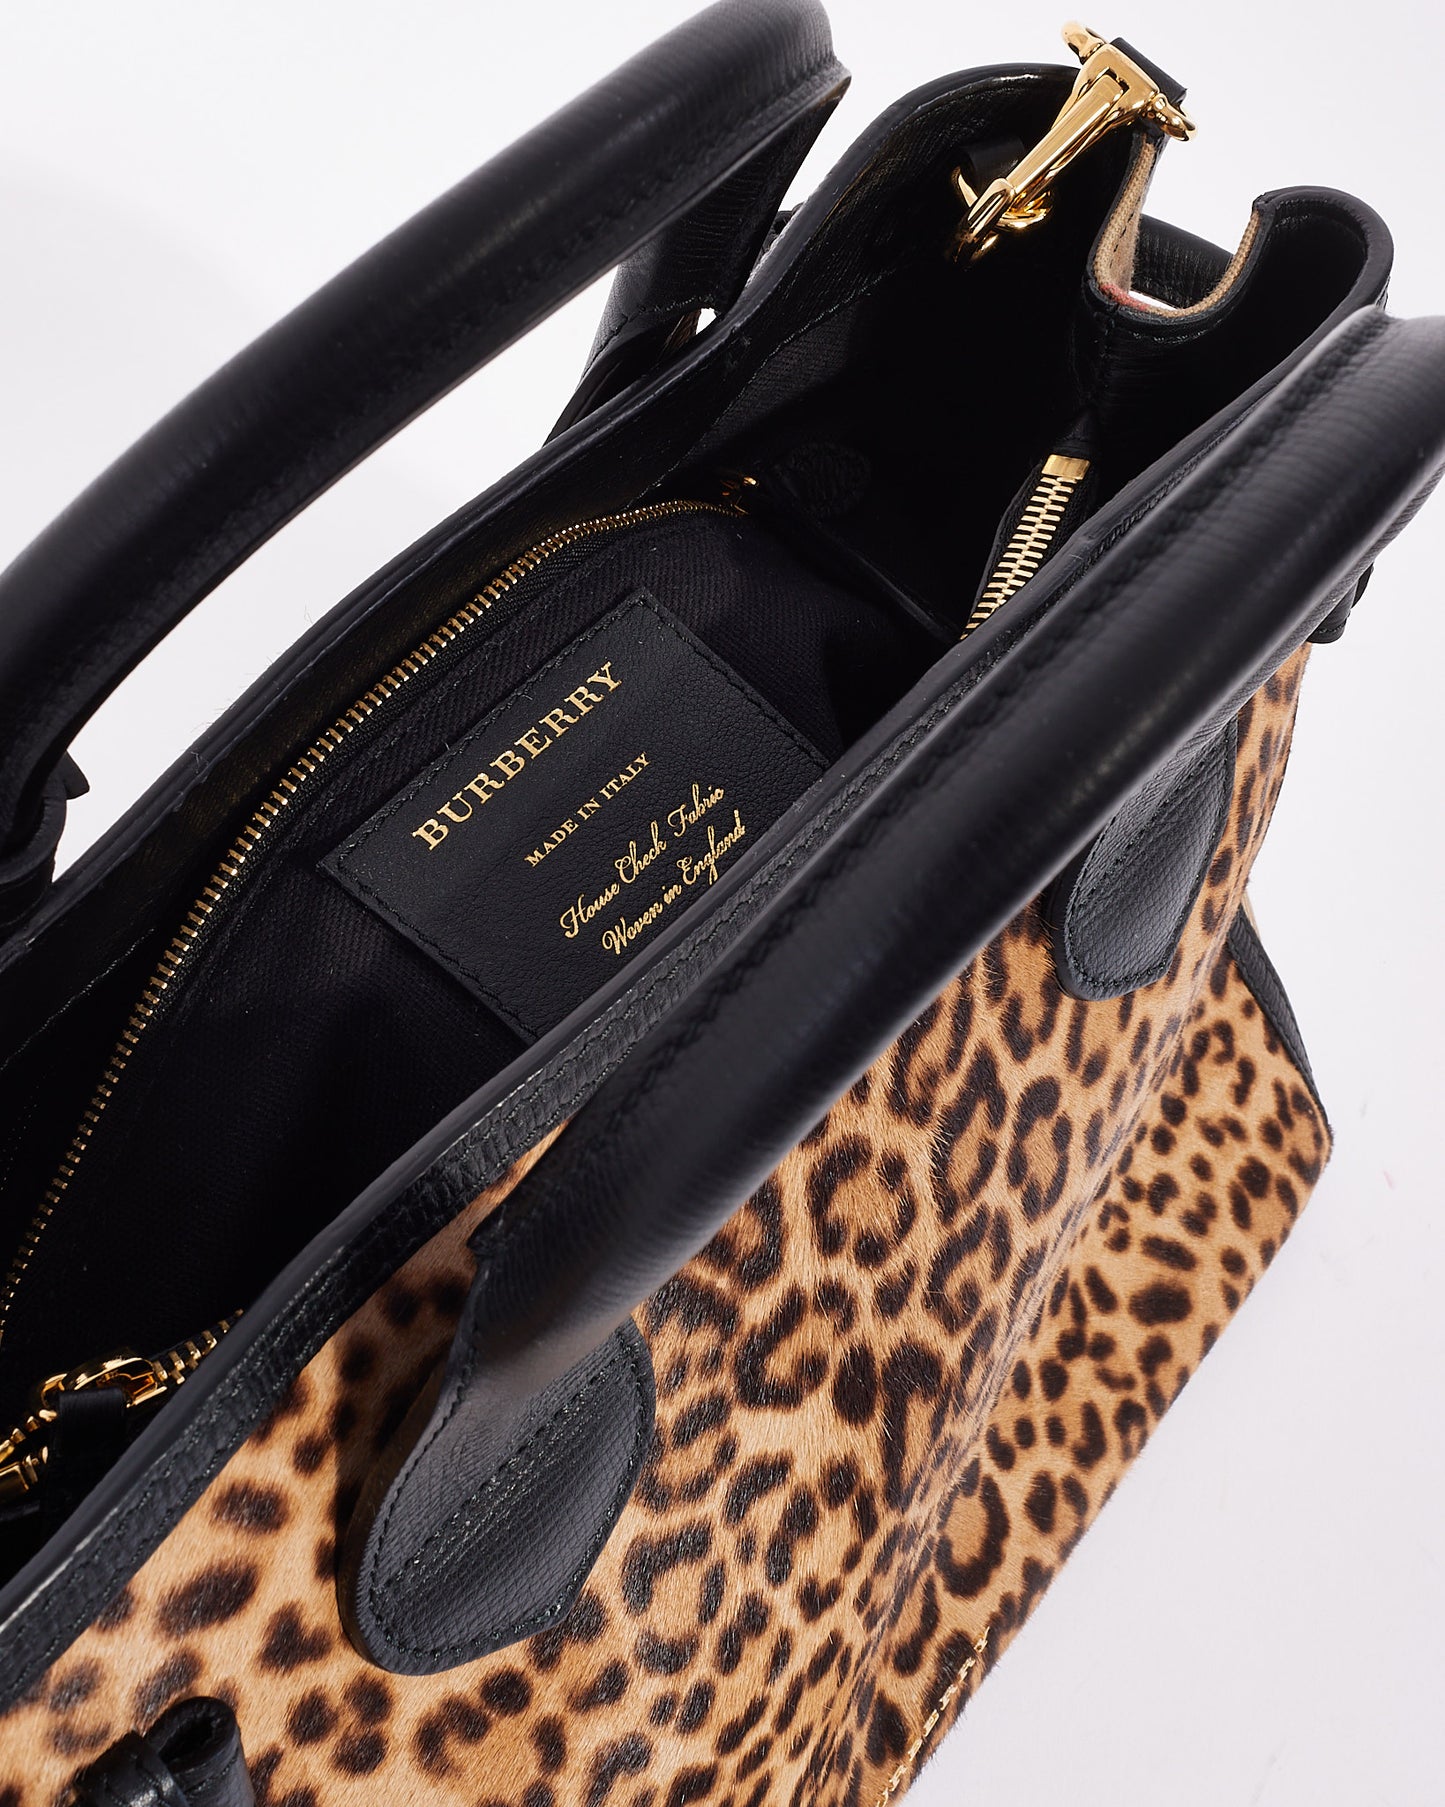 Burberry Leopard Calfhair Banner Tote Bag